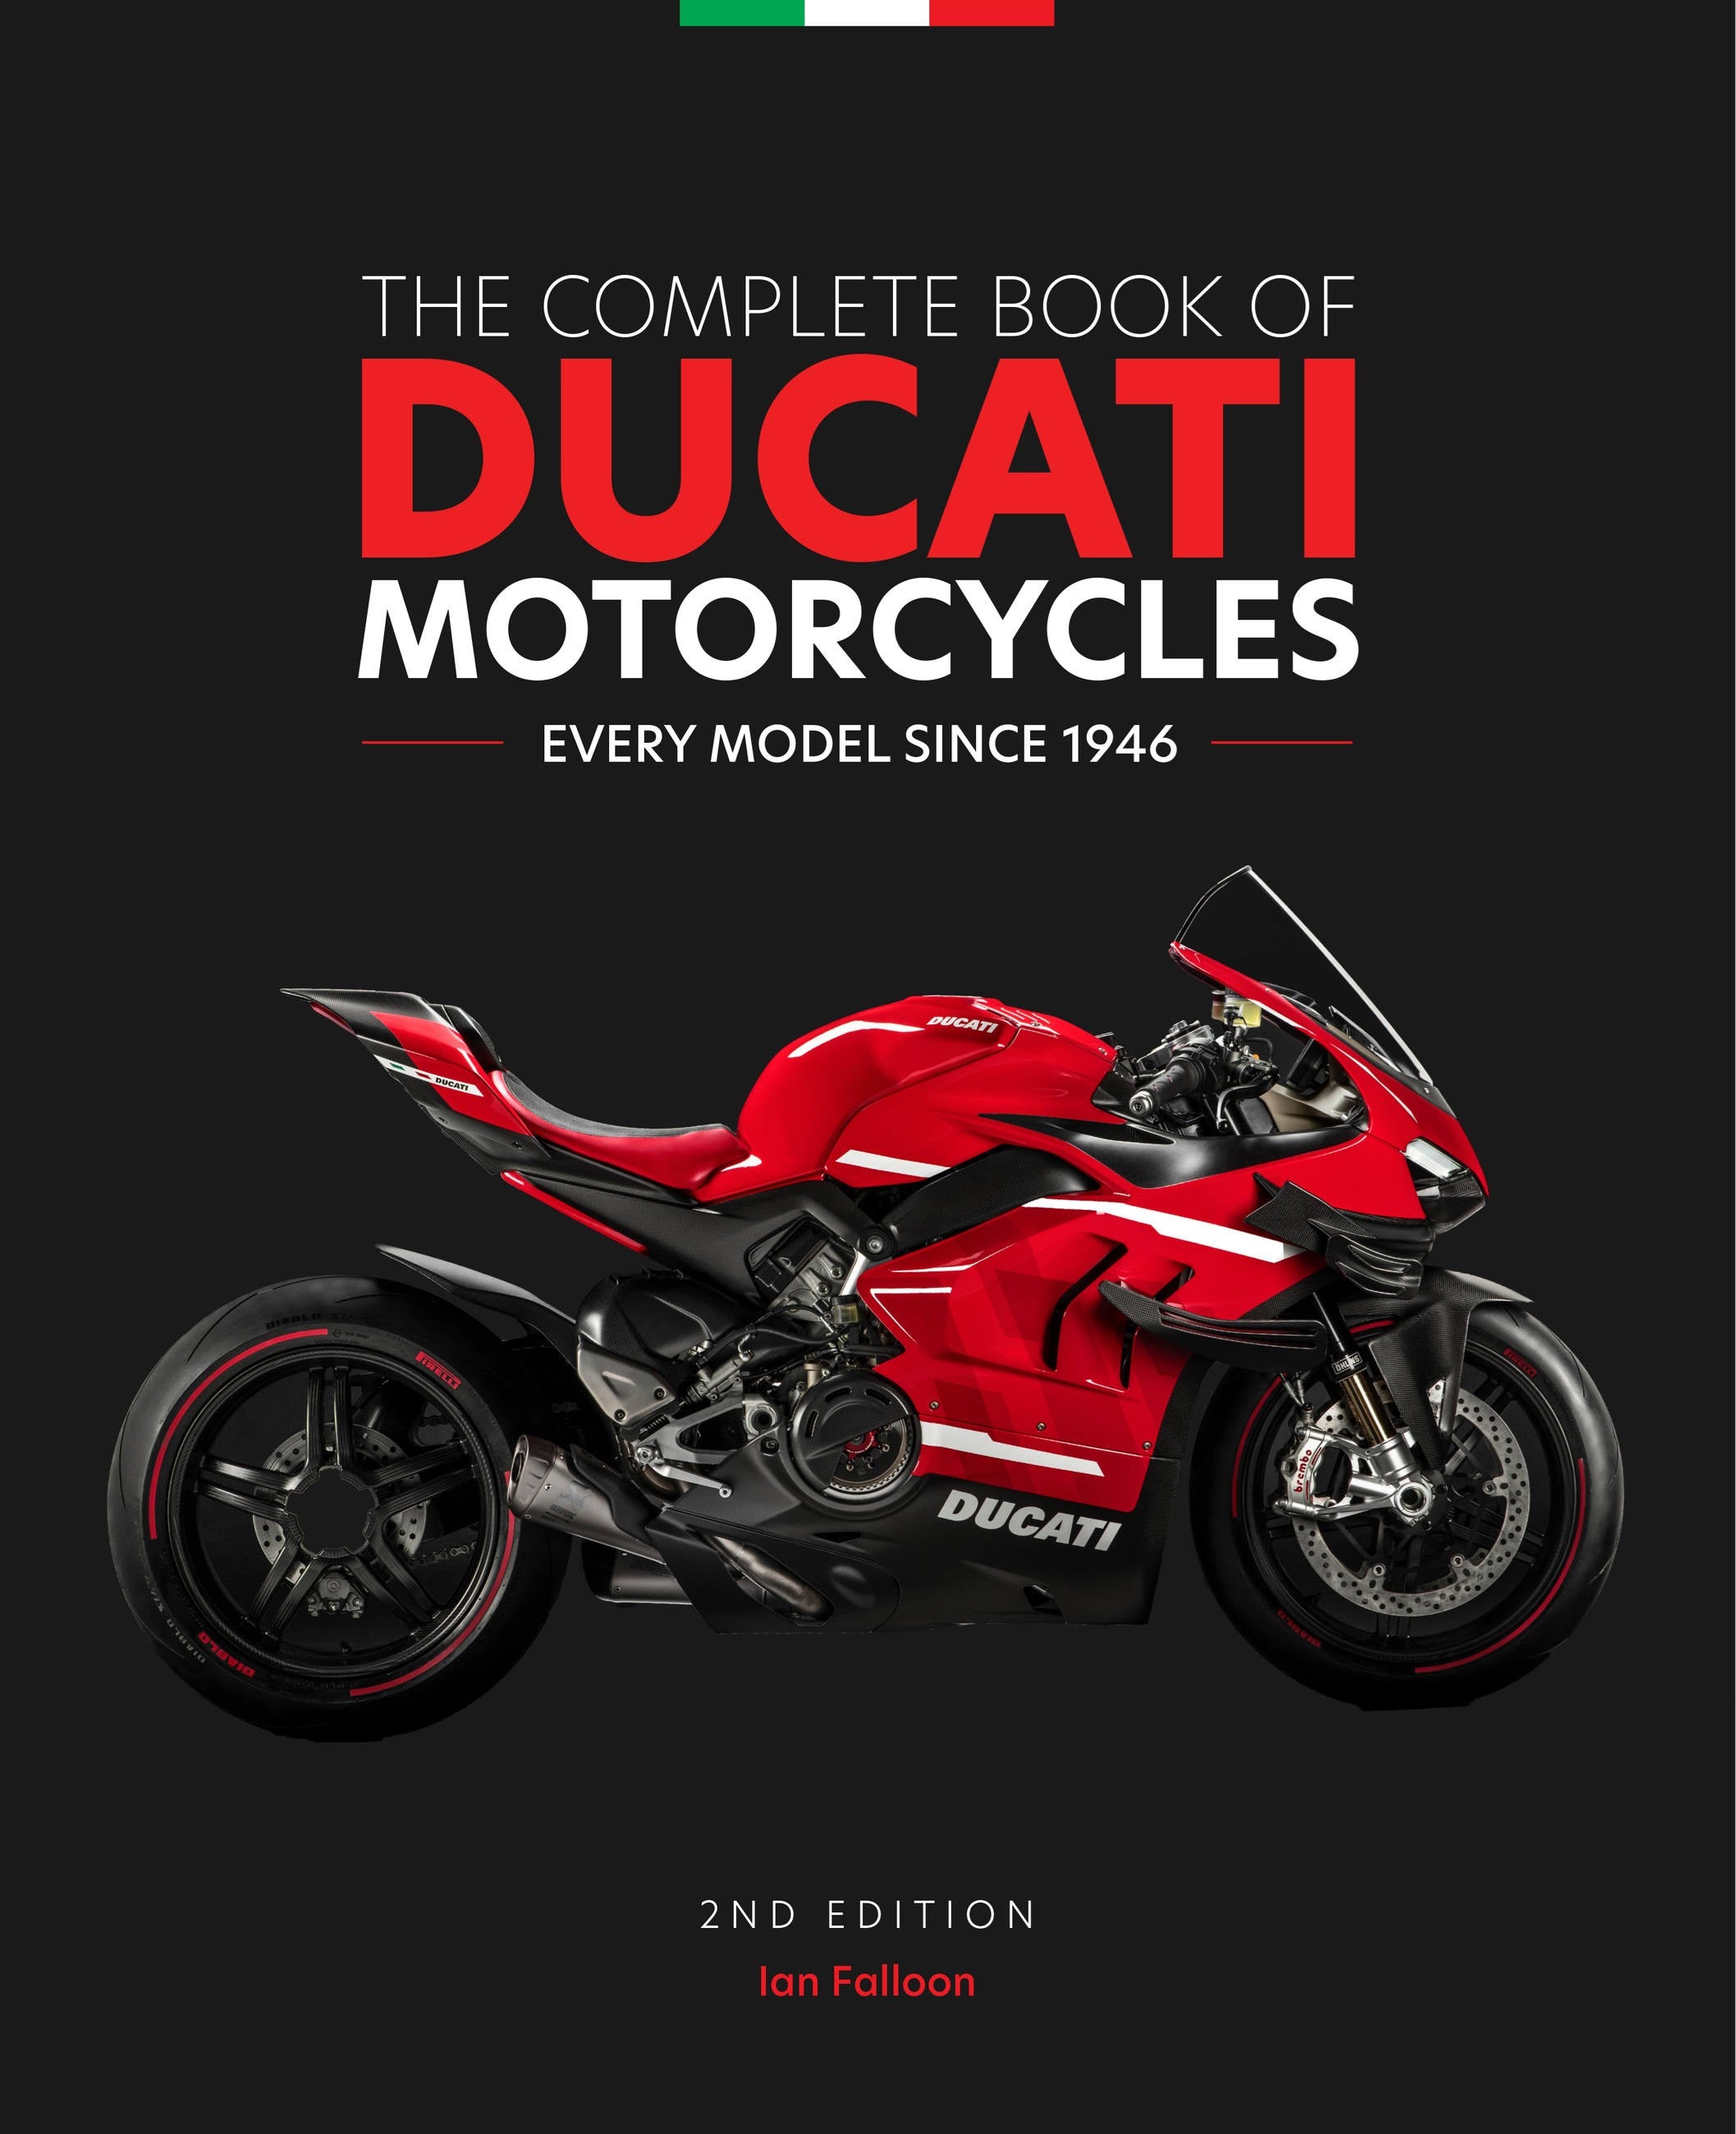 The Complete Book of Ducati Motorcycles, 2nd Edition: Every Model Since 1946 (2nd Edition, New edition)